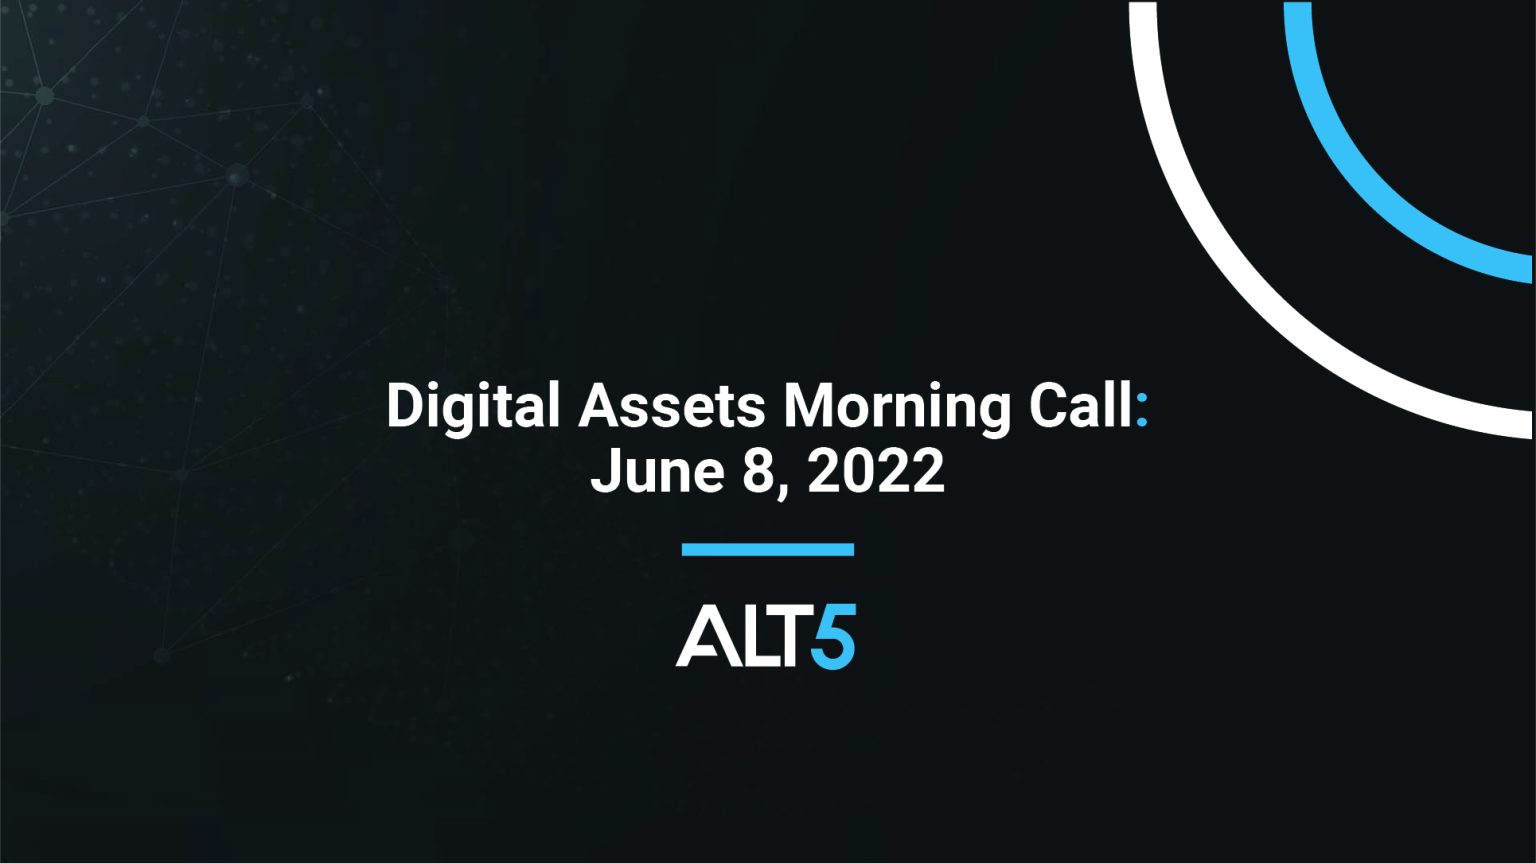 Digital Assets Morning Call: June 8 2022 - Venture funds demonstrate continued interest in crypto; central bank tightening picks up